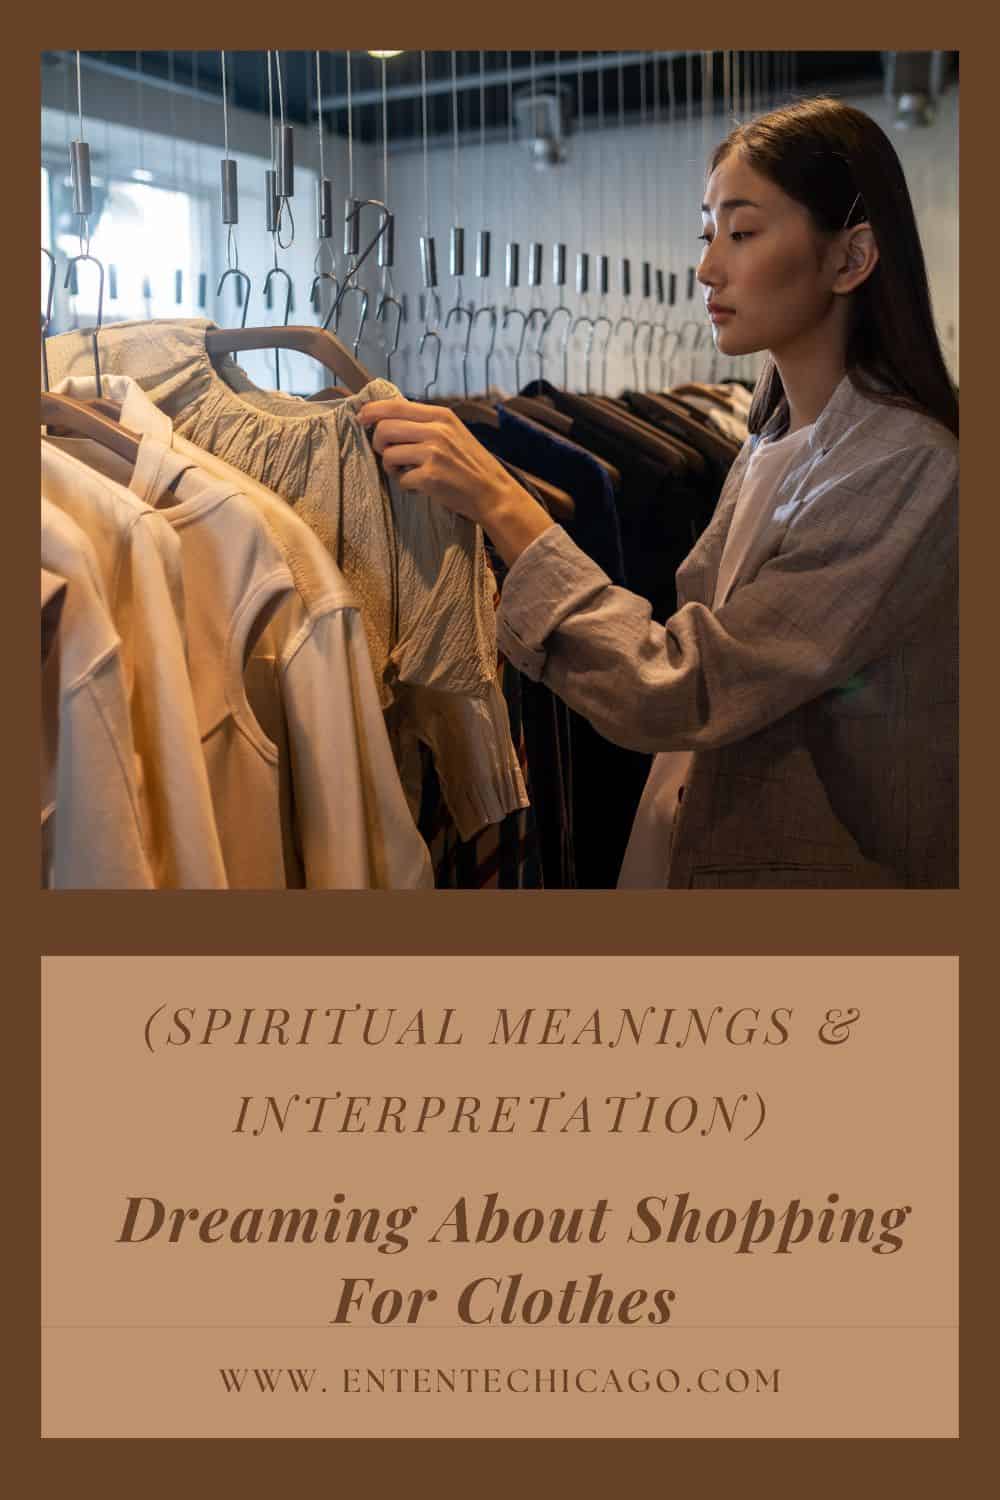 Dreaming About Shopping For Clothes (Spiritual Meanings & Interpretation)